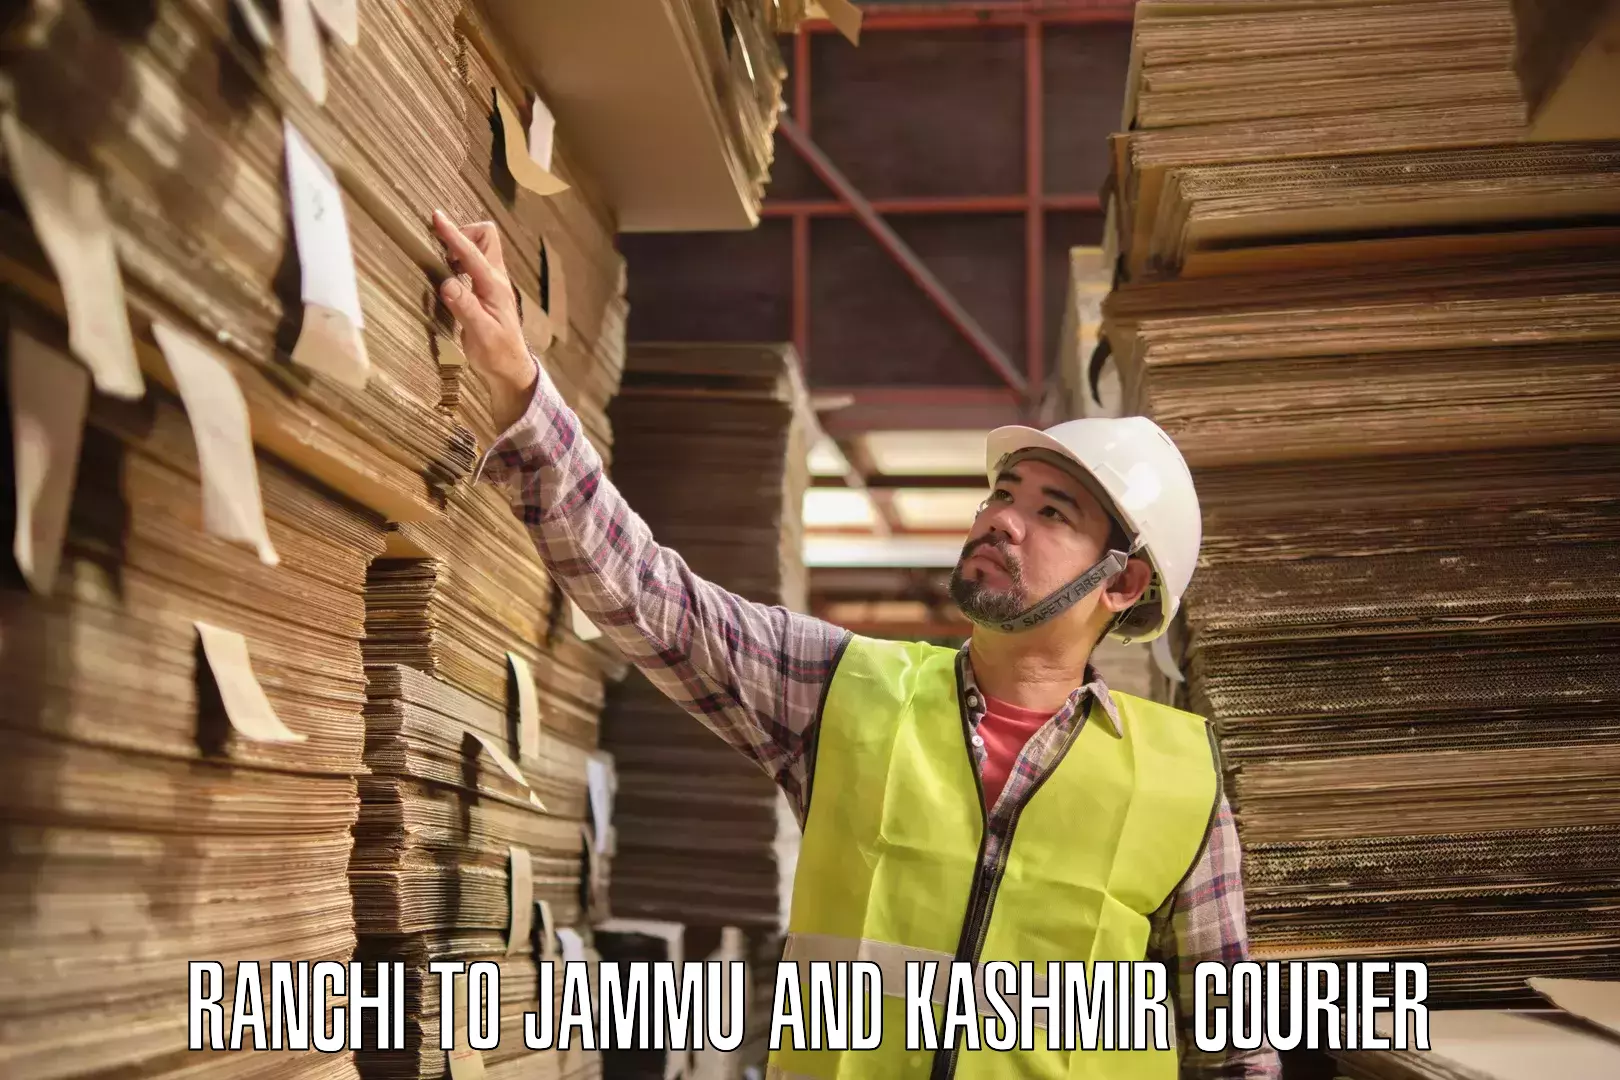 User-friendly courier app Ranchi to Baramulla